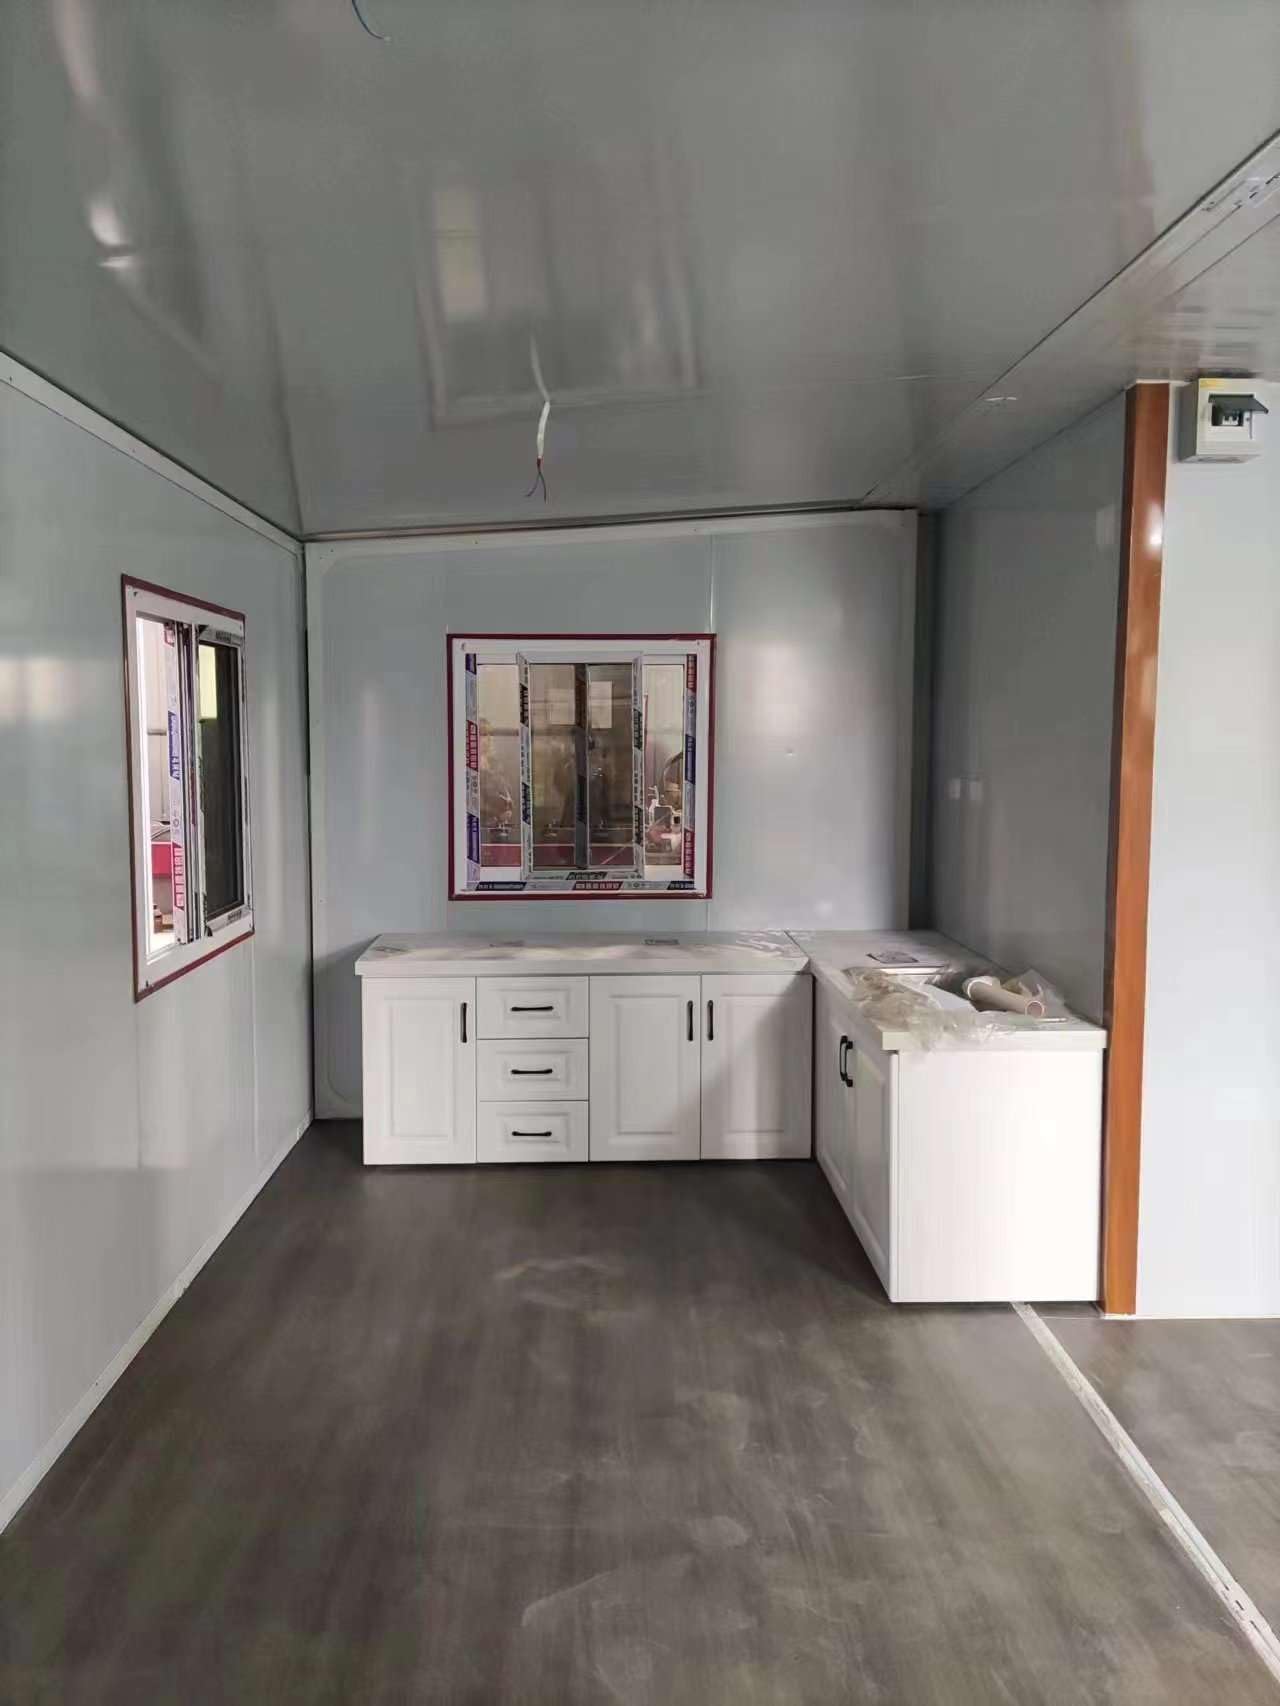 Prefabricated Portable Tiny House 20x19ft Waterproof & Fireproof Upgraded Version with Seismic Resistance, Insulated House to Live in with Restroom (Customizable)